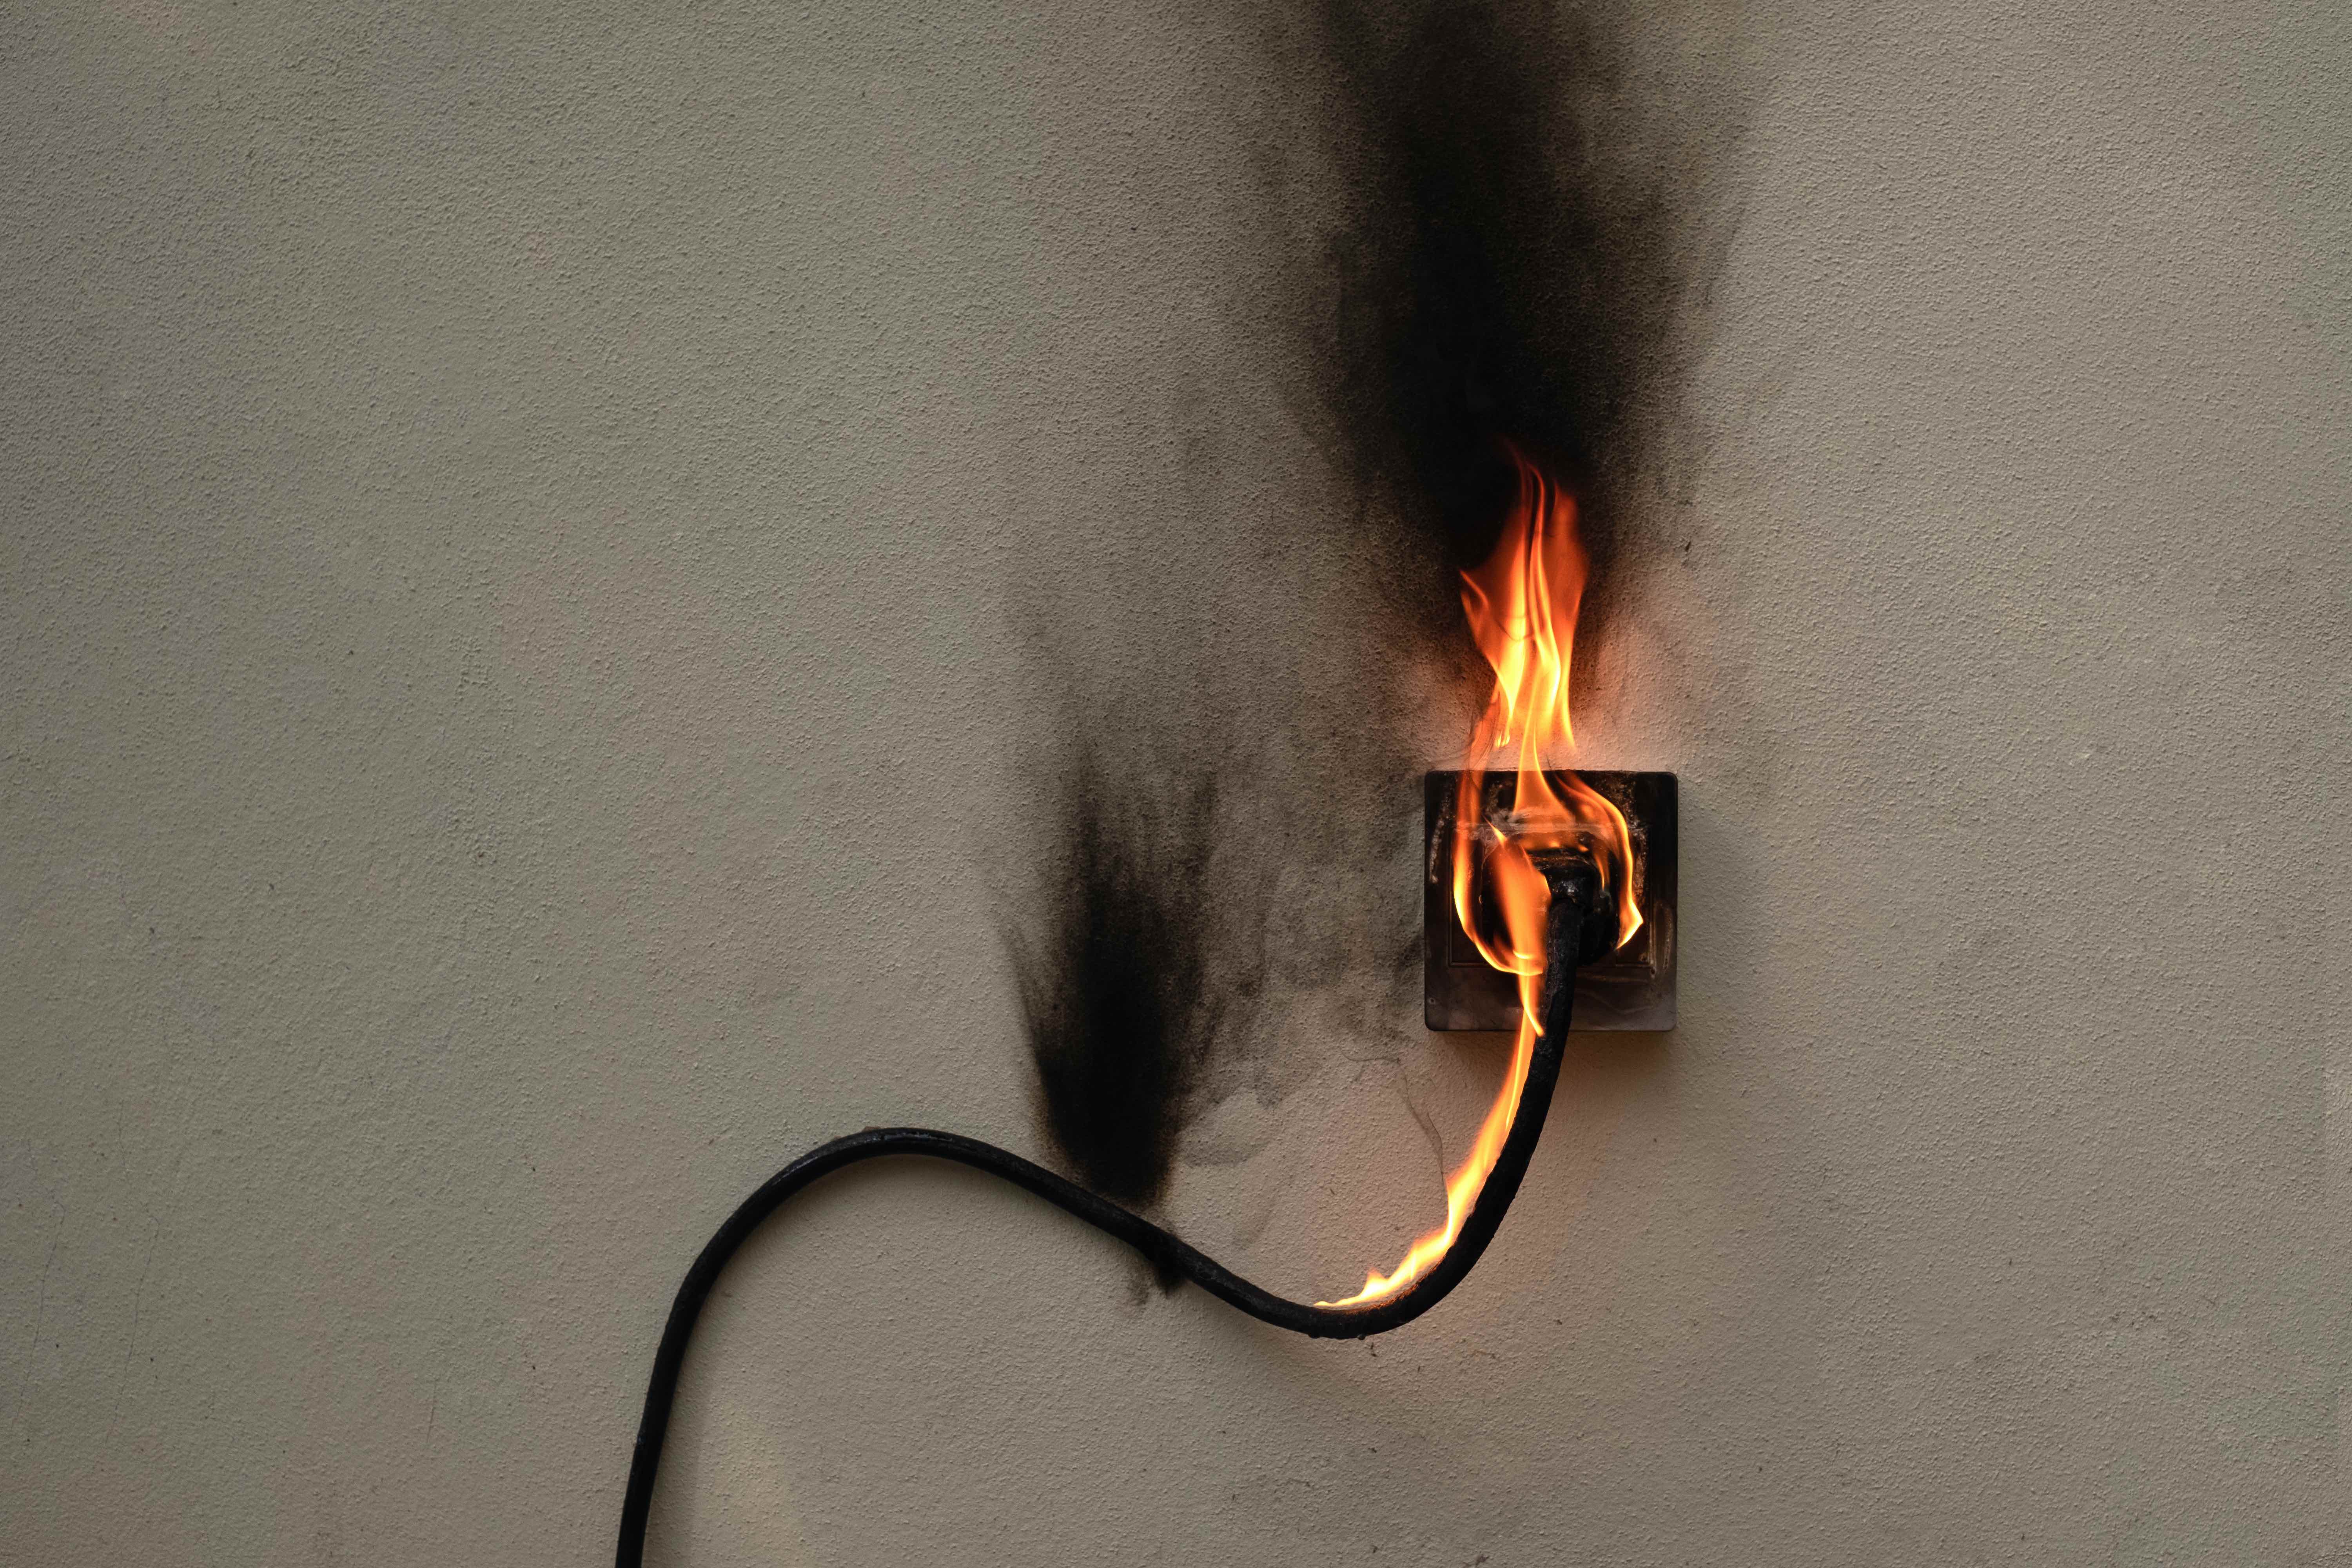  extension cord electrical fire safety